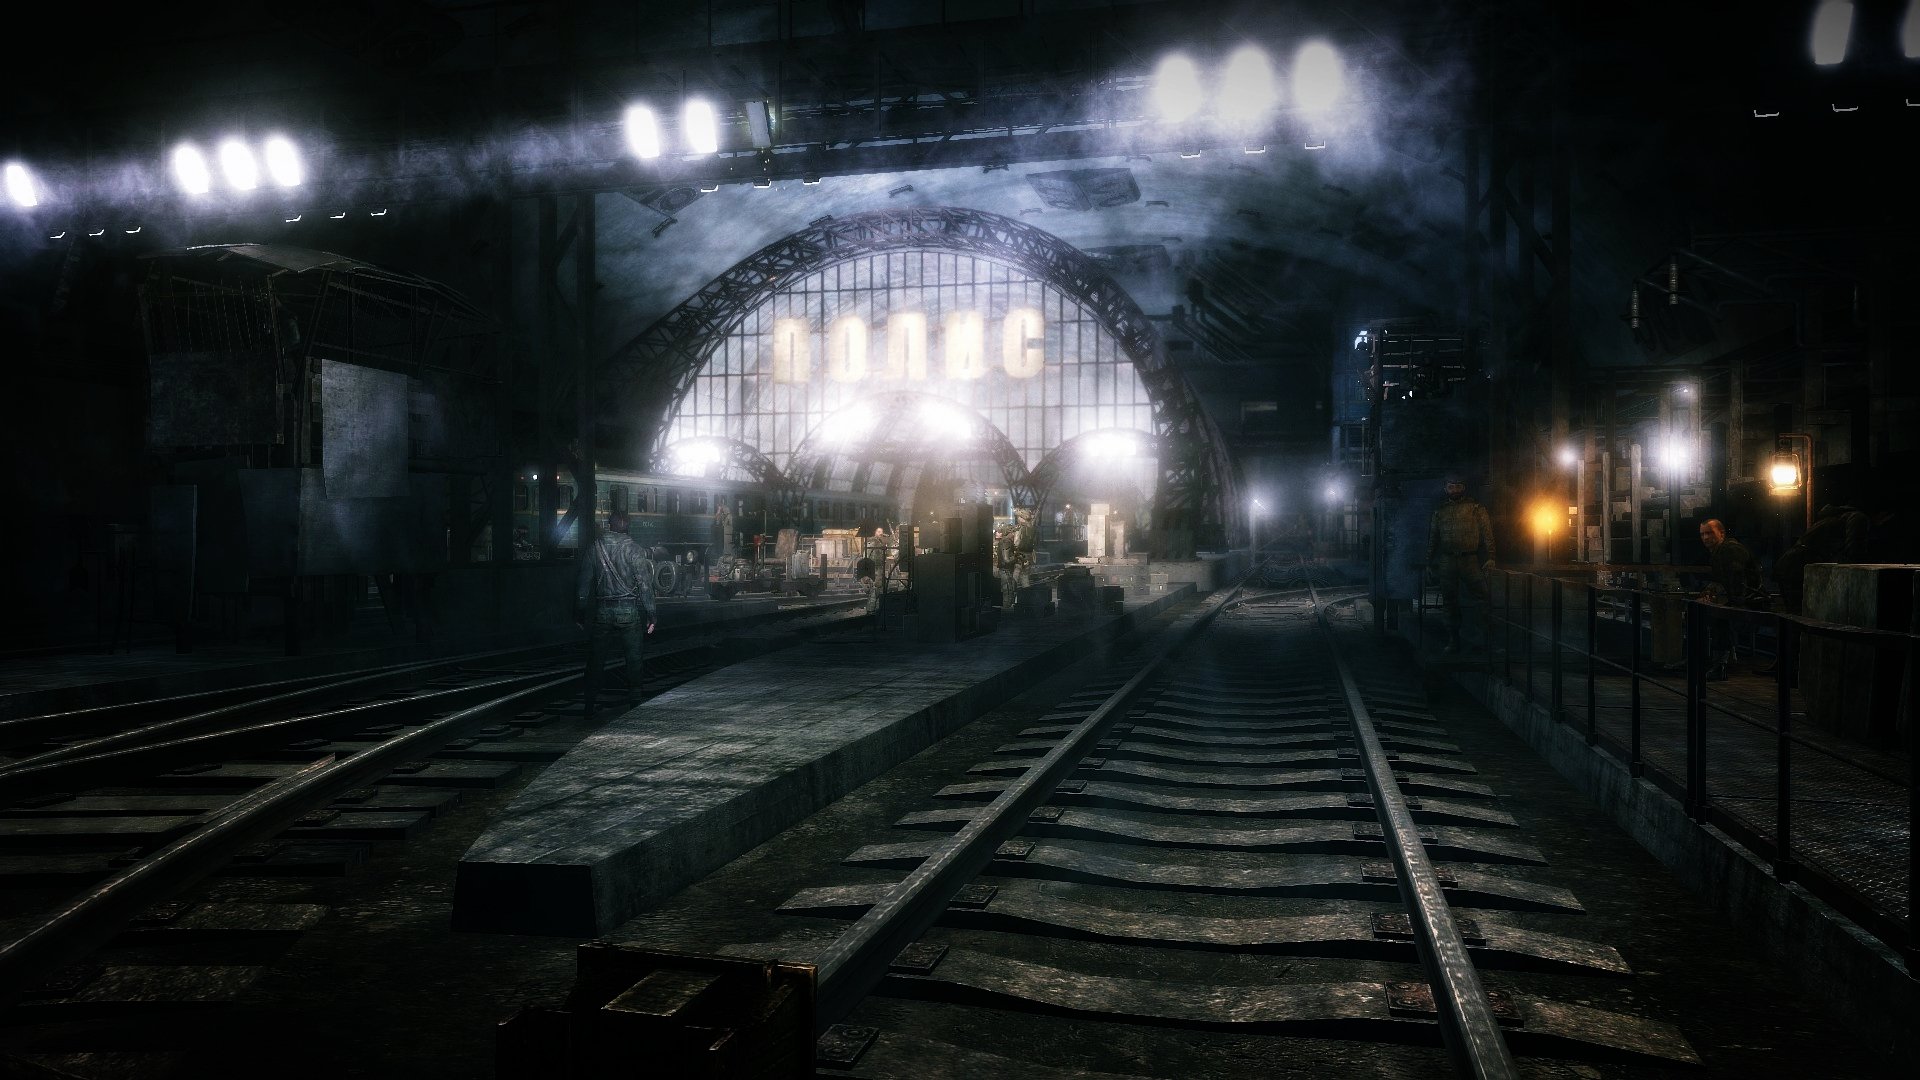 Metro 2033 Polis station Wallpaper 1920x1080 by th0mps0n434 on